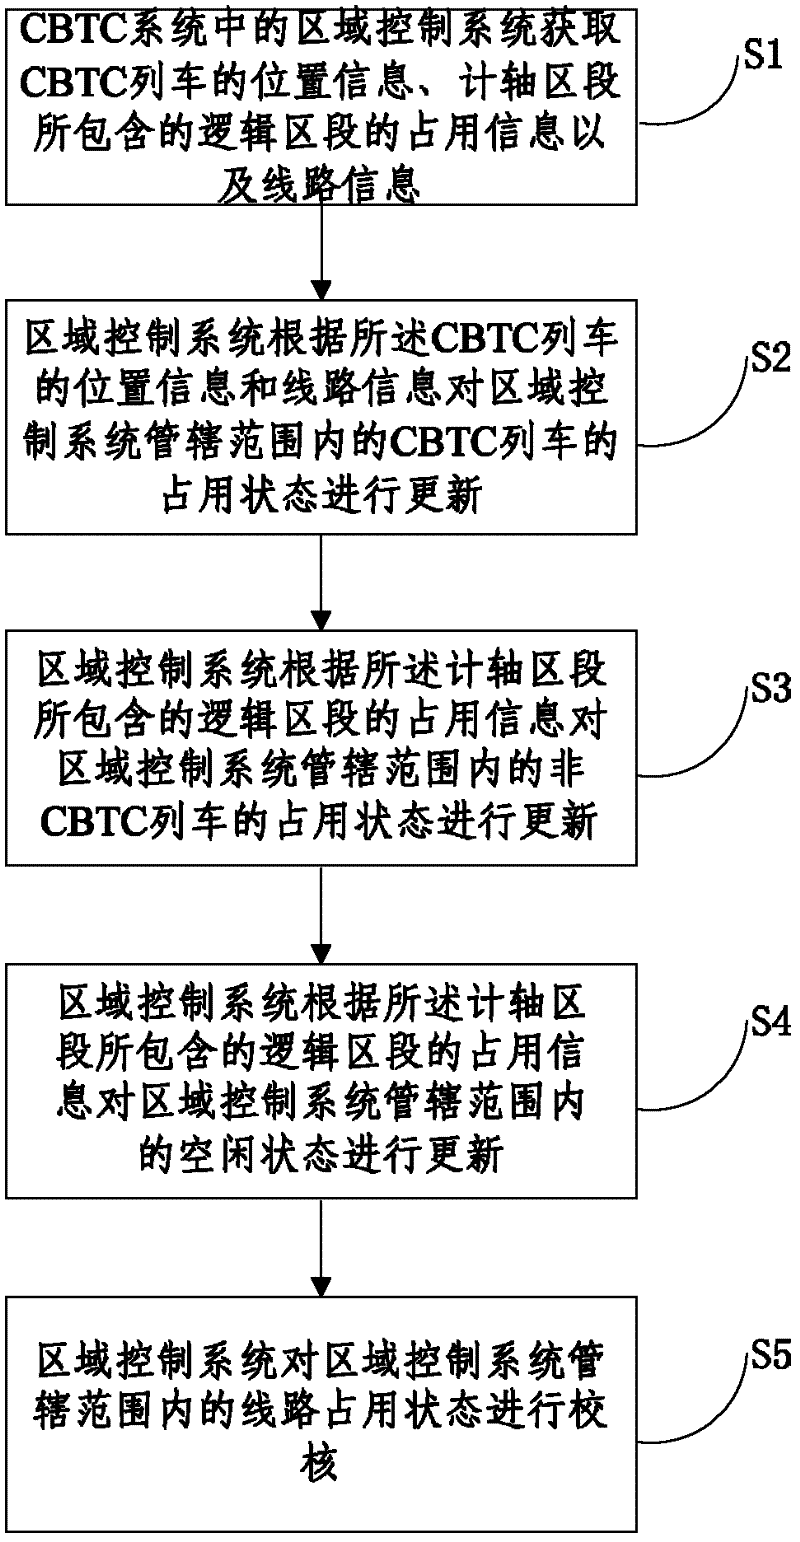 Method for monitoring track state based on zone control system in CBTC (communication based train control) system